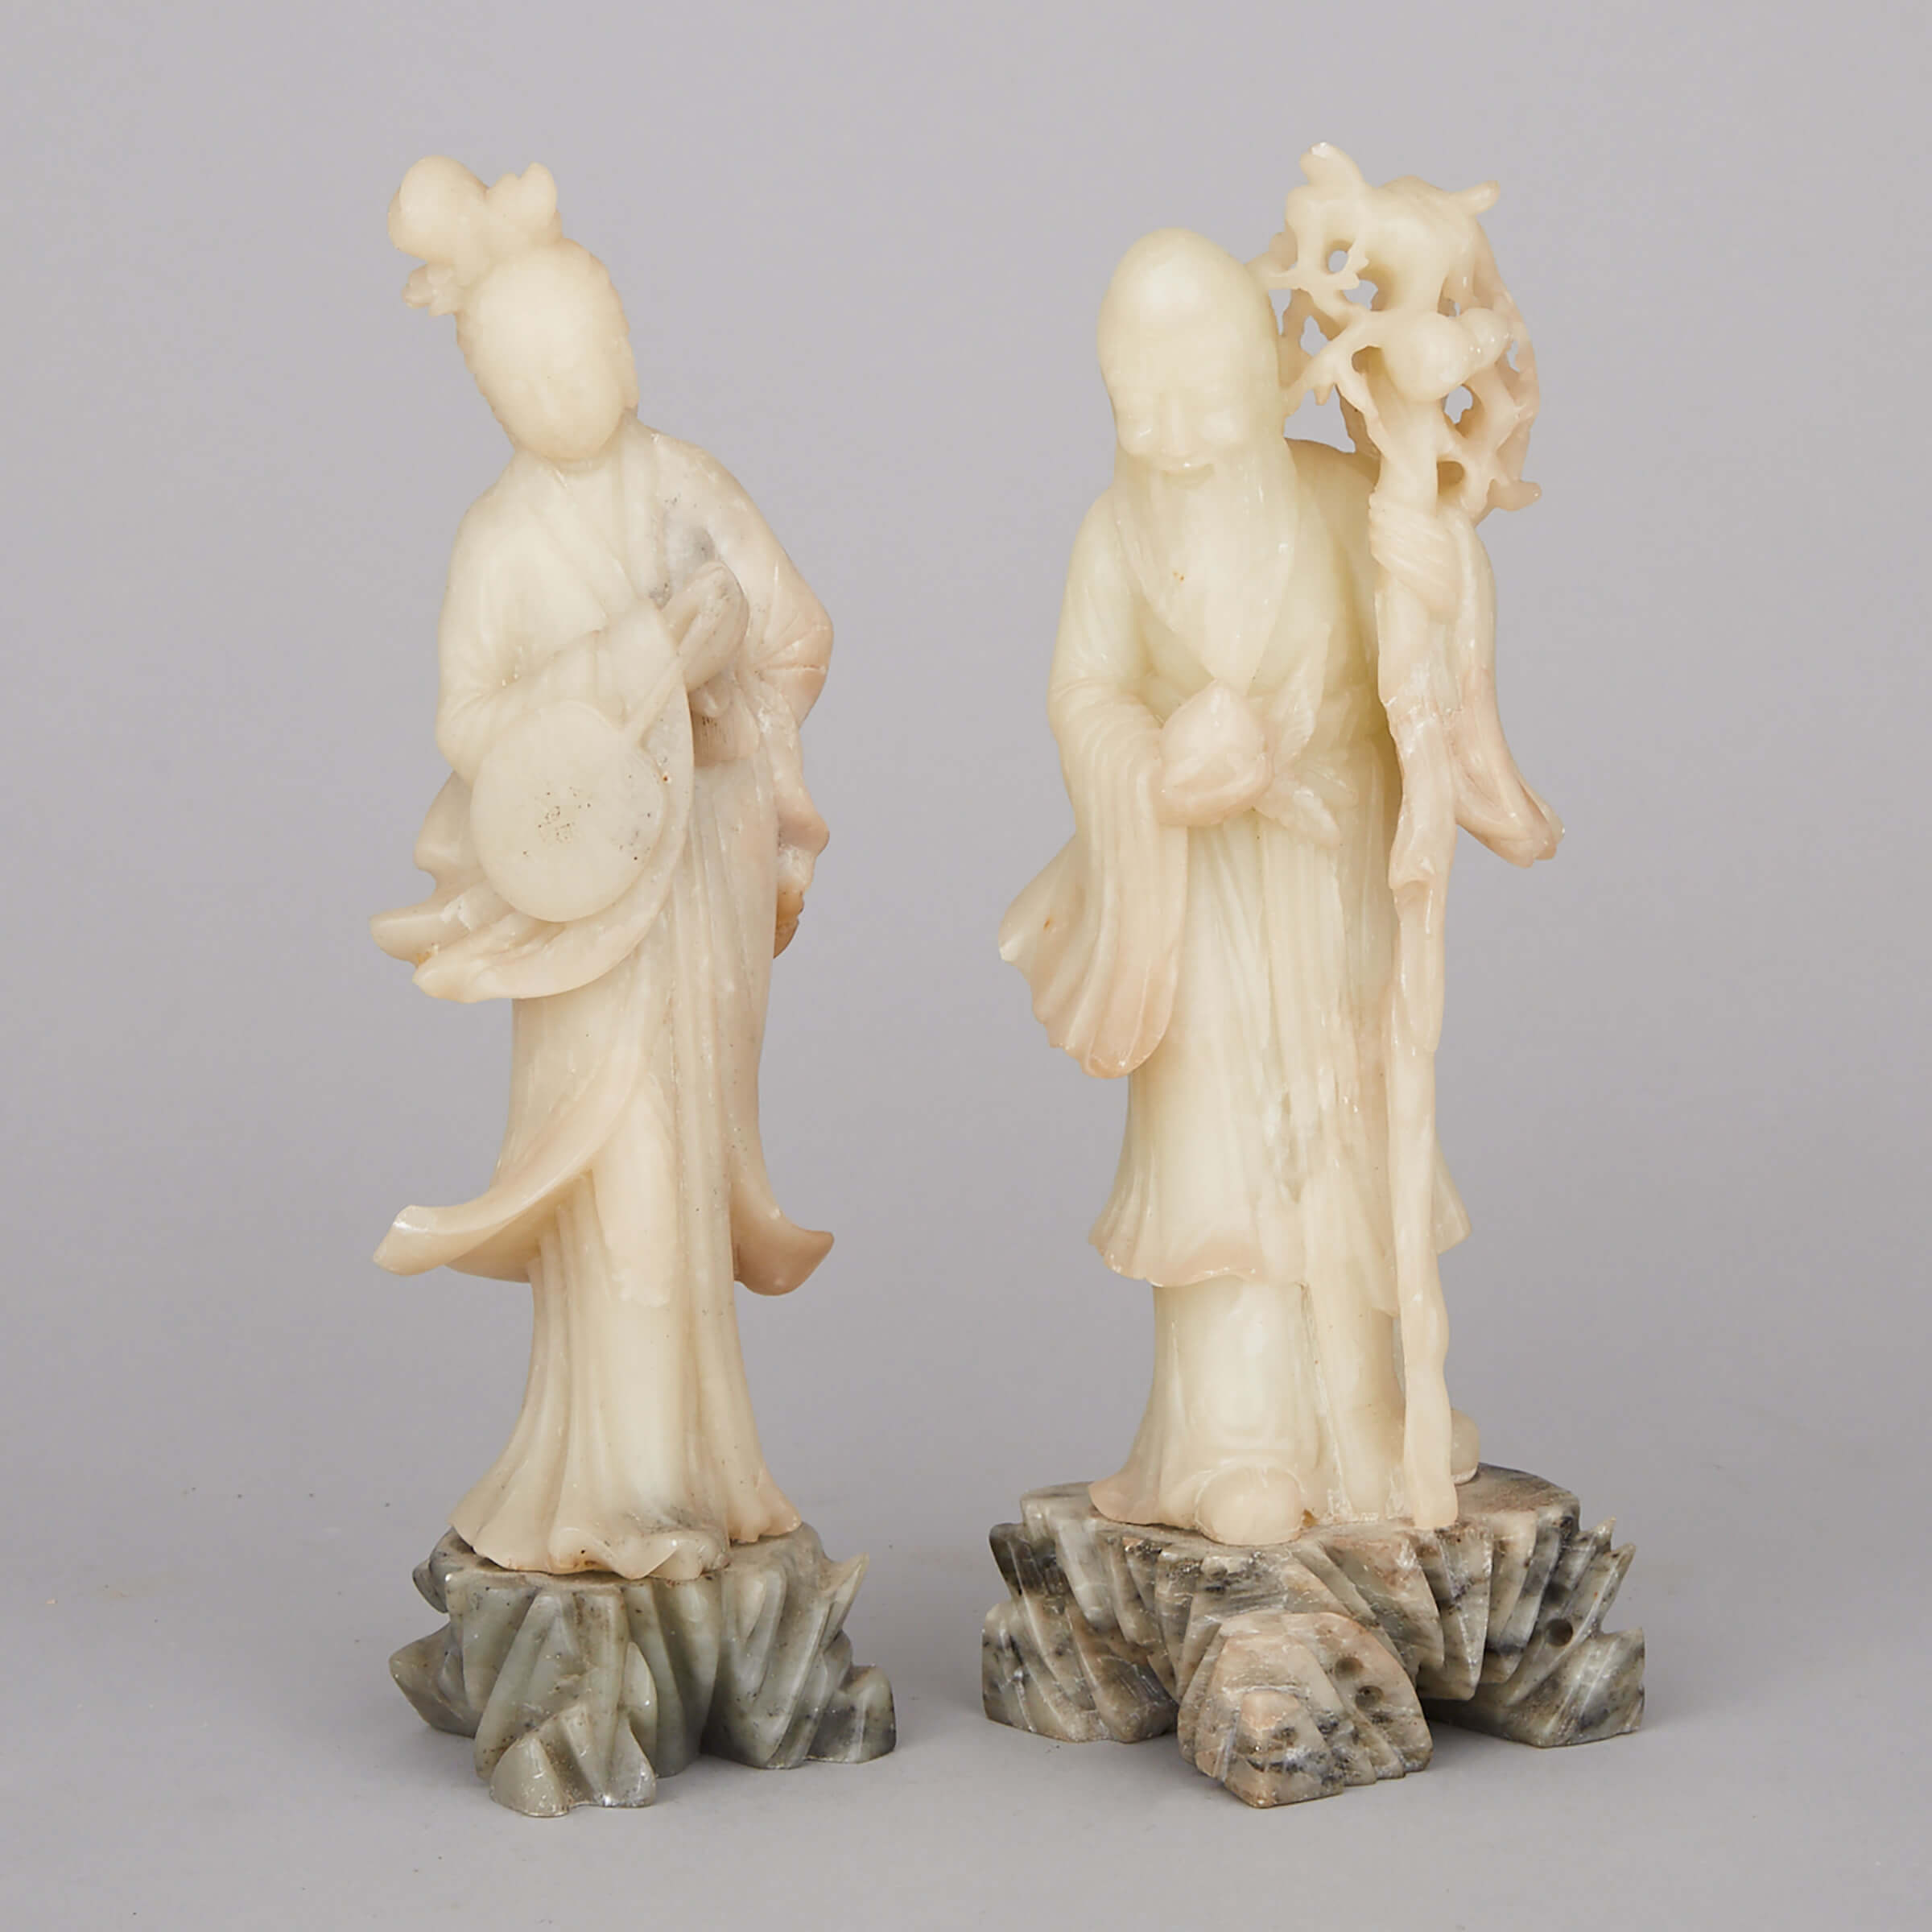 Two Soapstone Carvings of Immortals